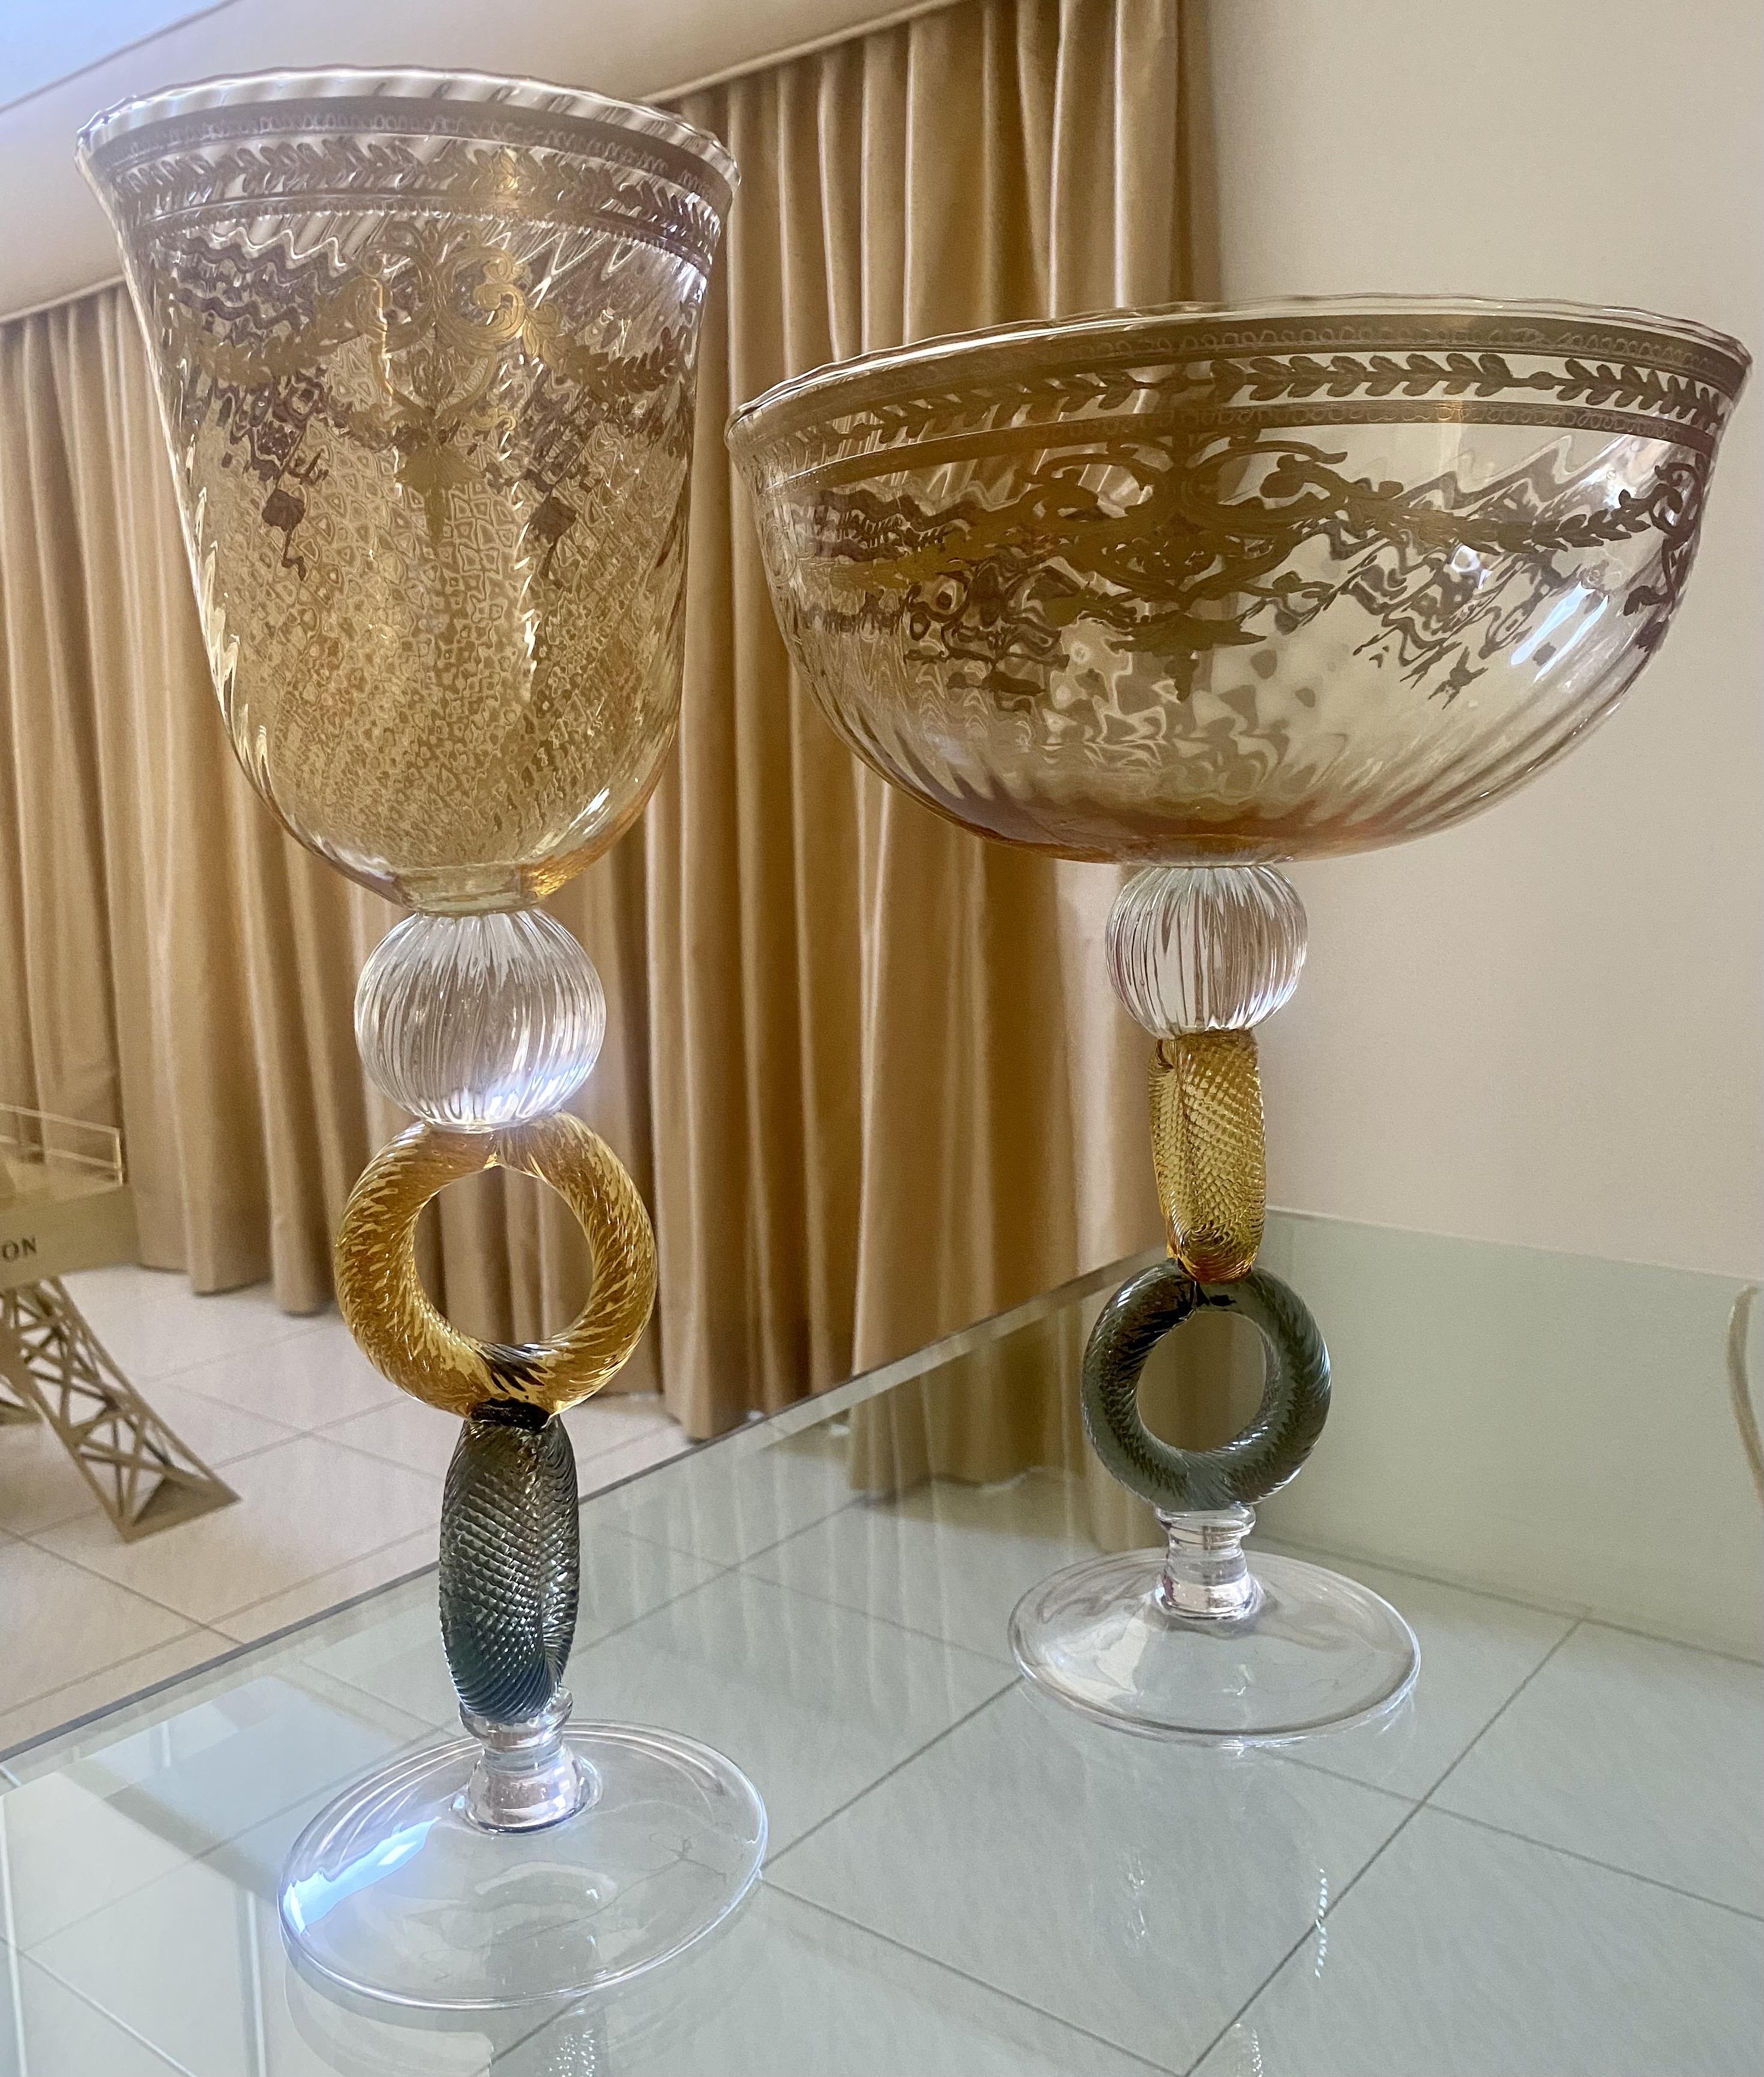 20th Century Pair of Italian Mid-Century Venetian Glass Art with Gold Trim For Sale